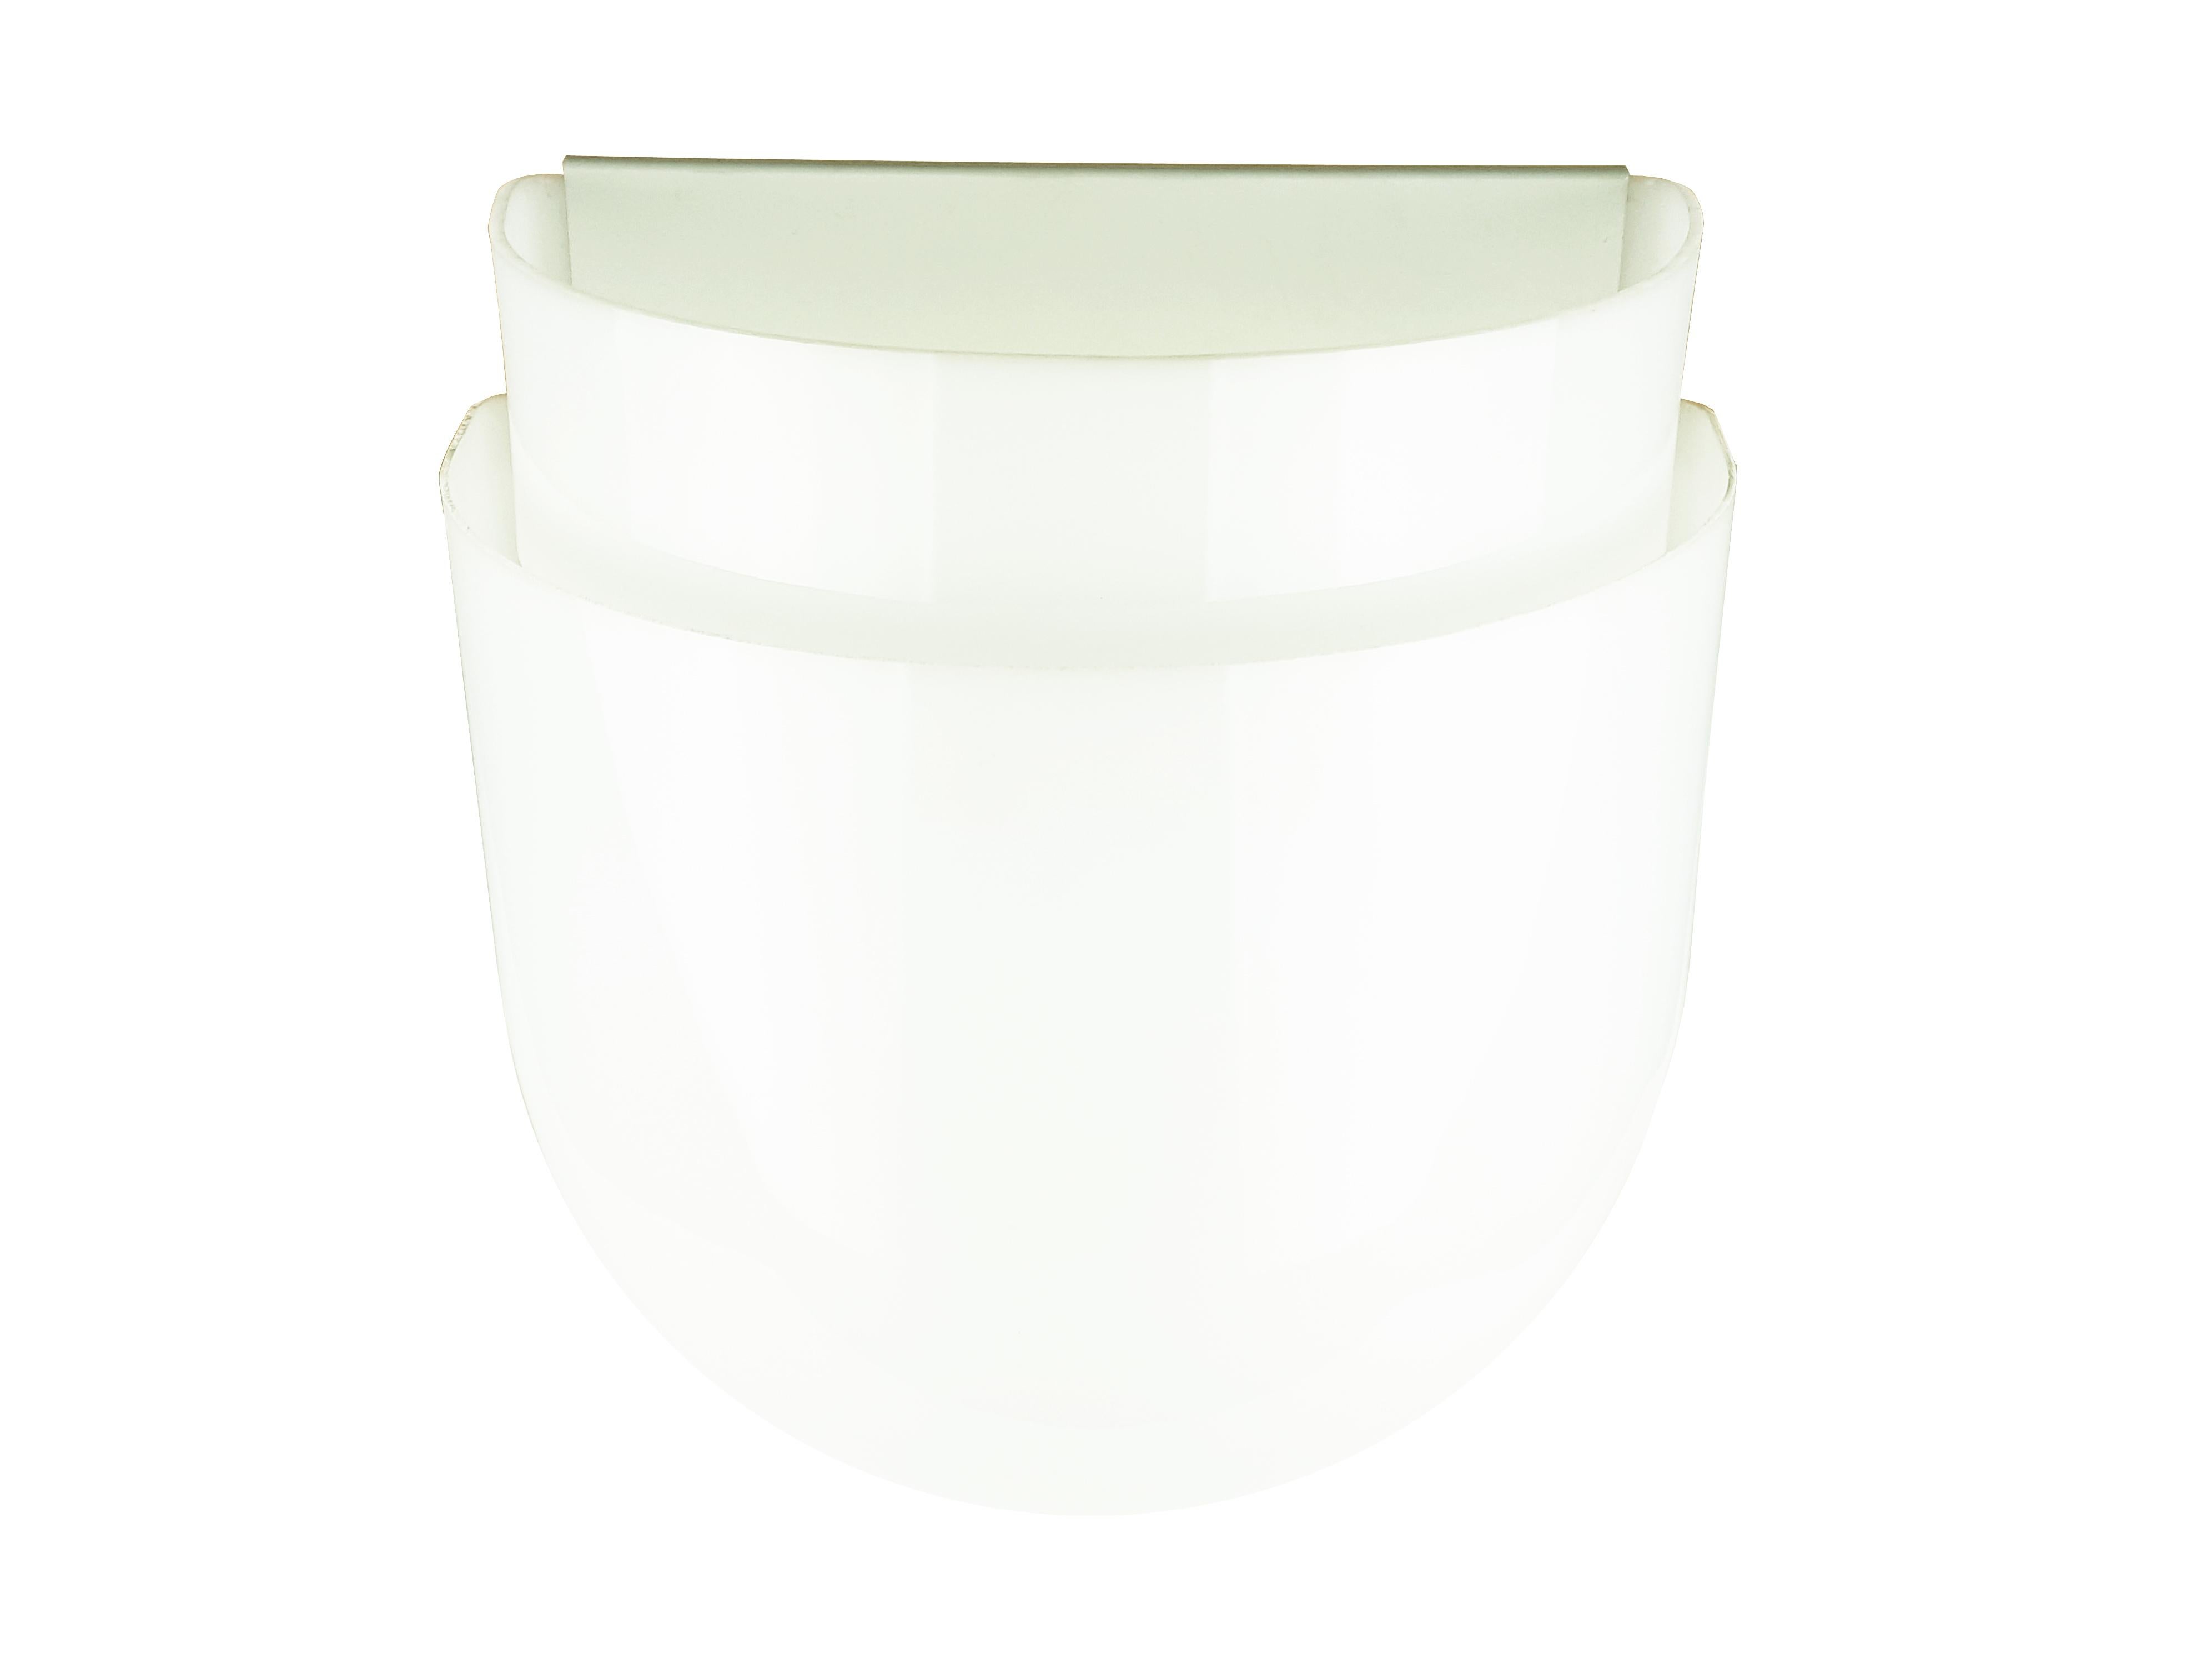 2-piece molded diffuser in opal acrylic material. Painted metal structure. Nickel-plated metal stop.